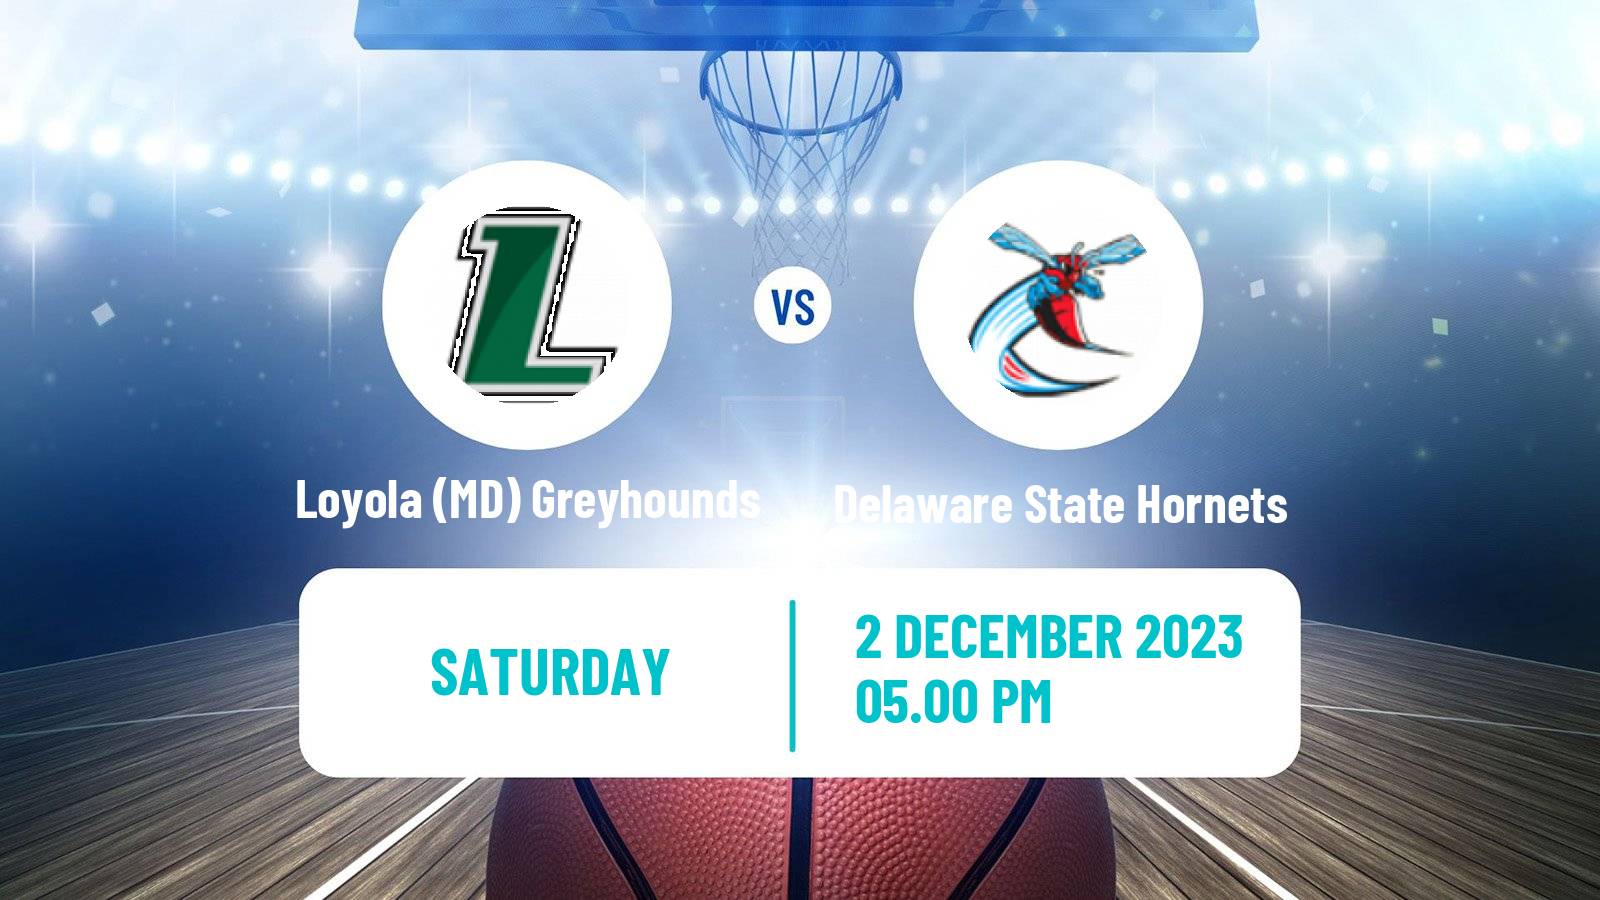 Basketball NCAA College Basketball Loyola (MD) Greyhounds - Delaware State Hornets